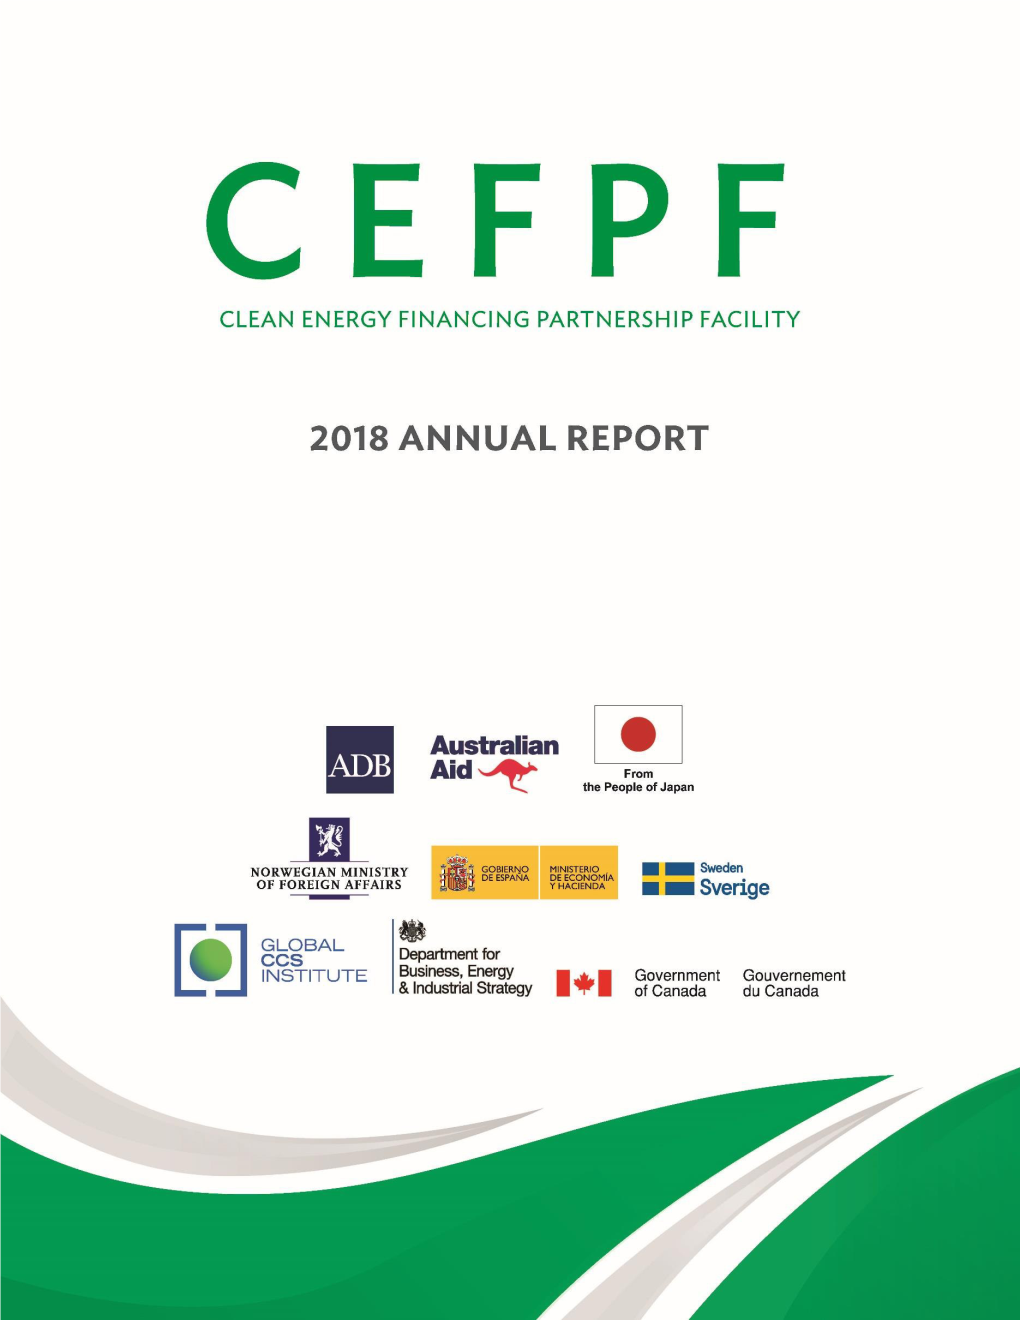 Clean Energy Financing Partnership Facility: Annual Report 2018